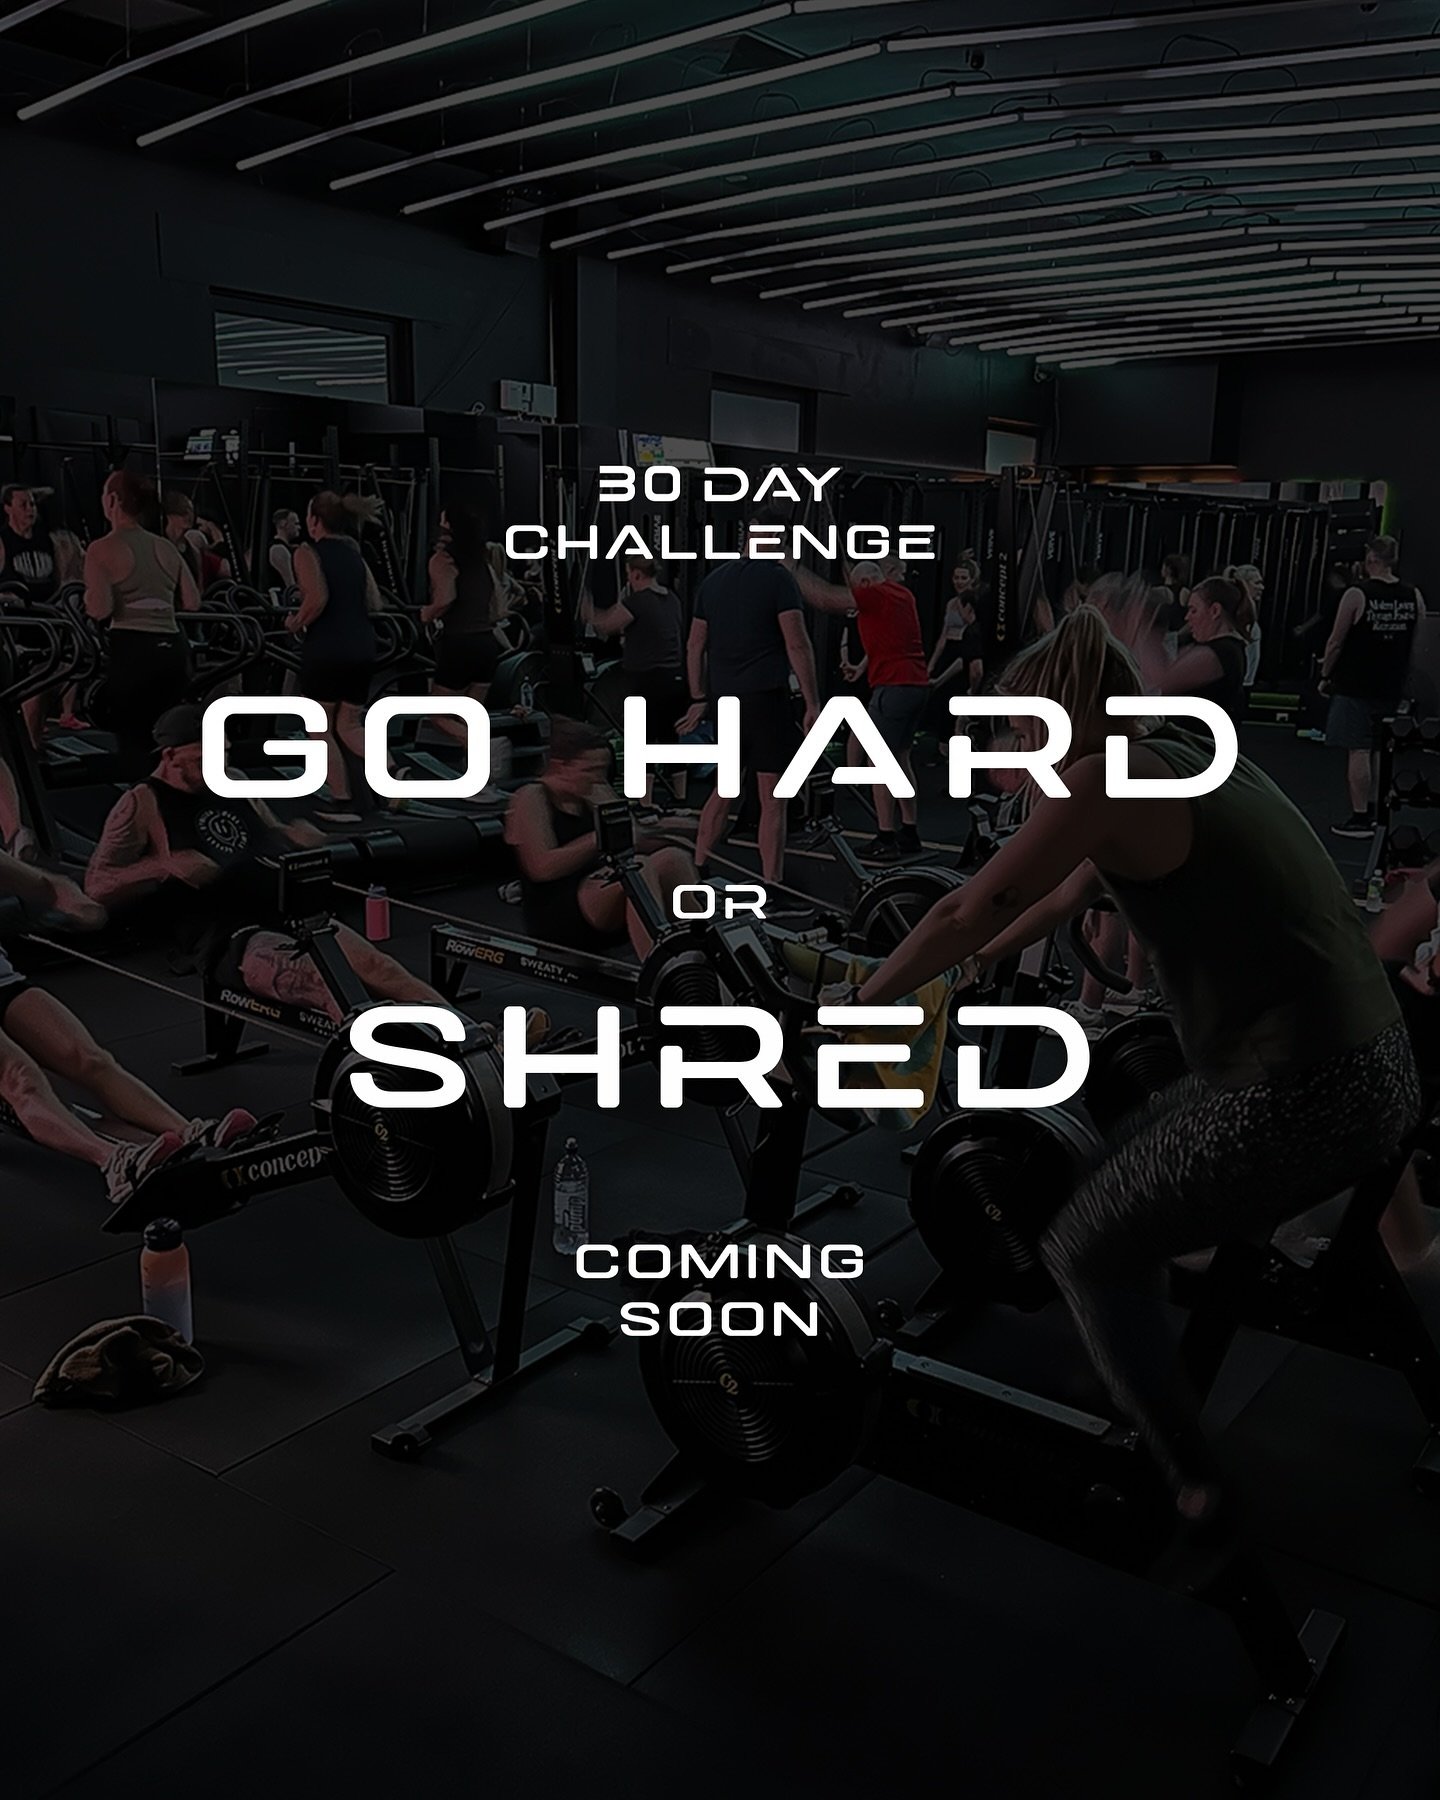 🚨 NEW CHALLENGE INCOMING 🚨

A 30 day challenge you won&rsquo;t want to miss is about to hit Sweaty AF! You choose your path, GO HARD or SHRED!